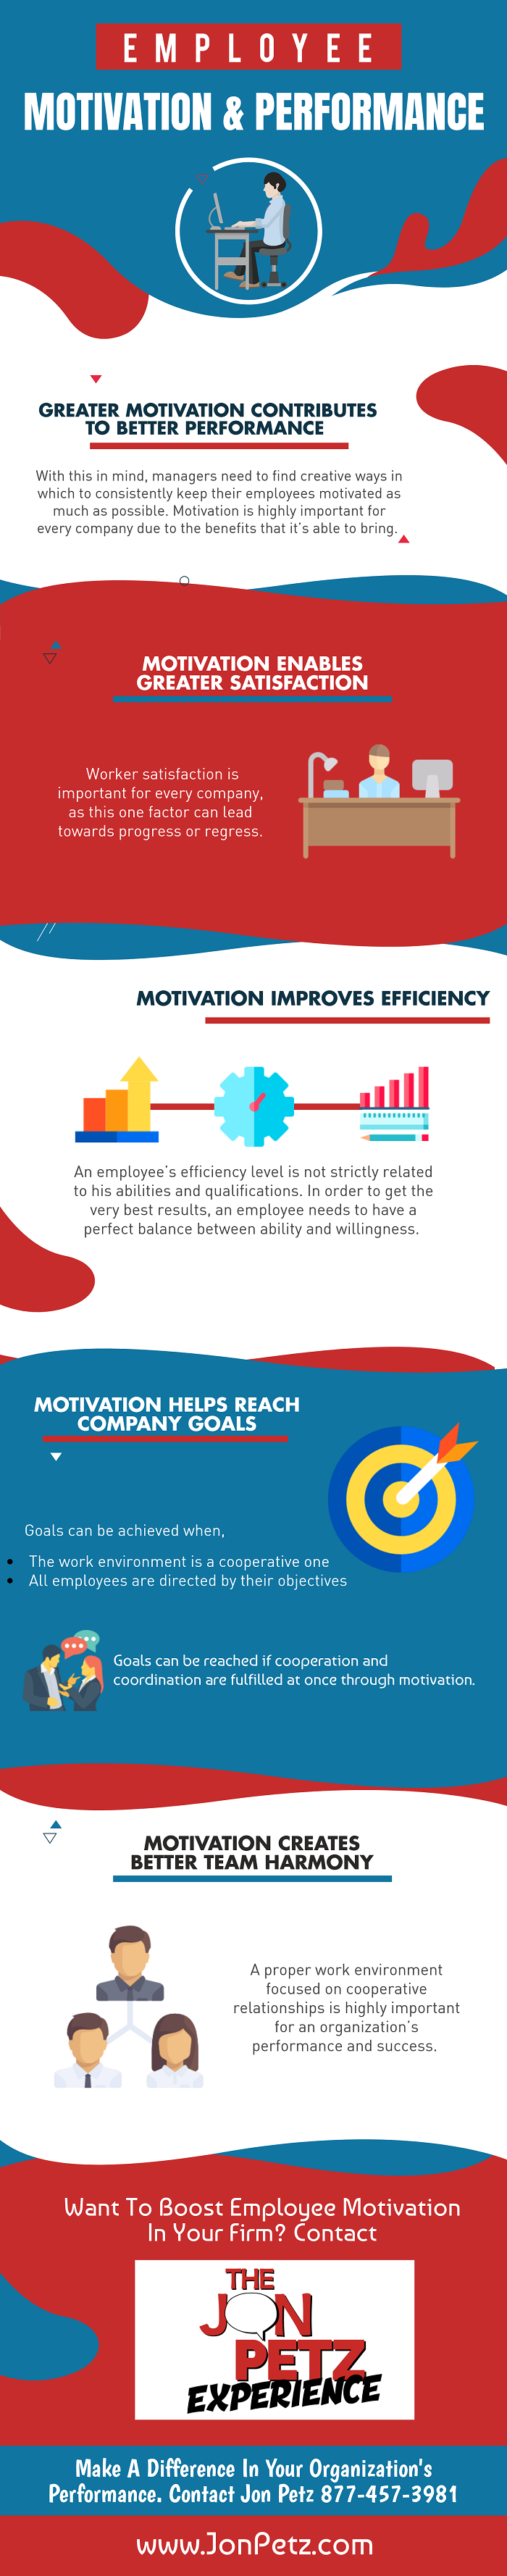 Employee Motivation and Performance